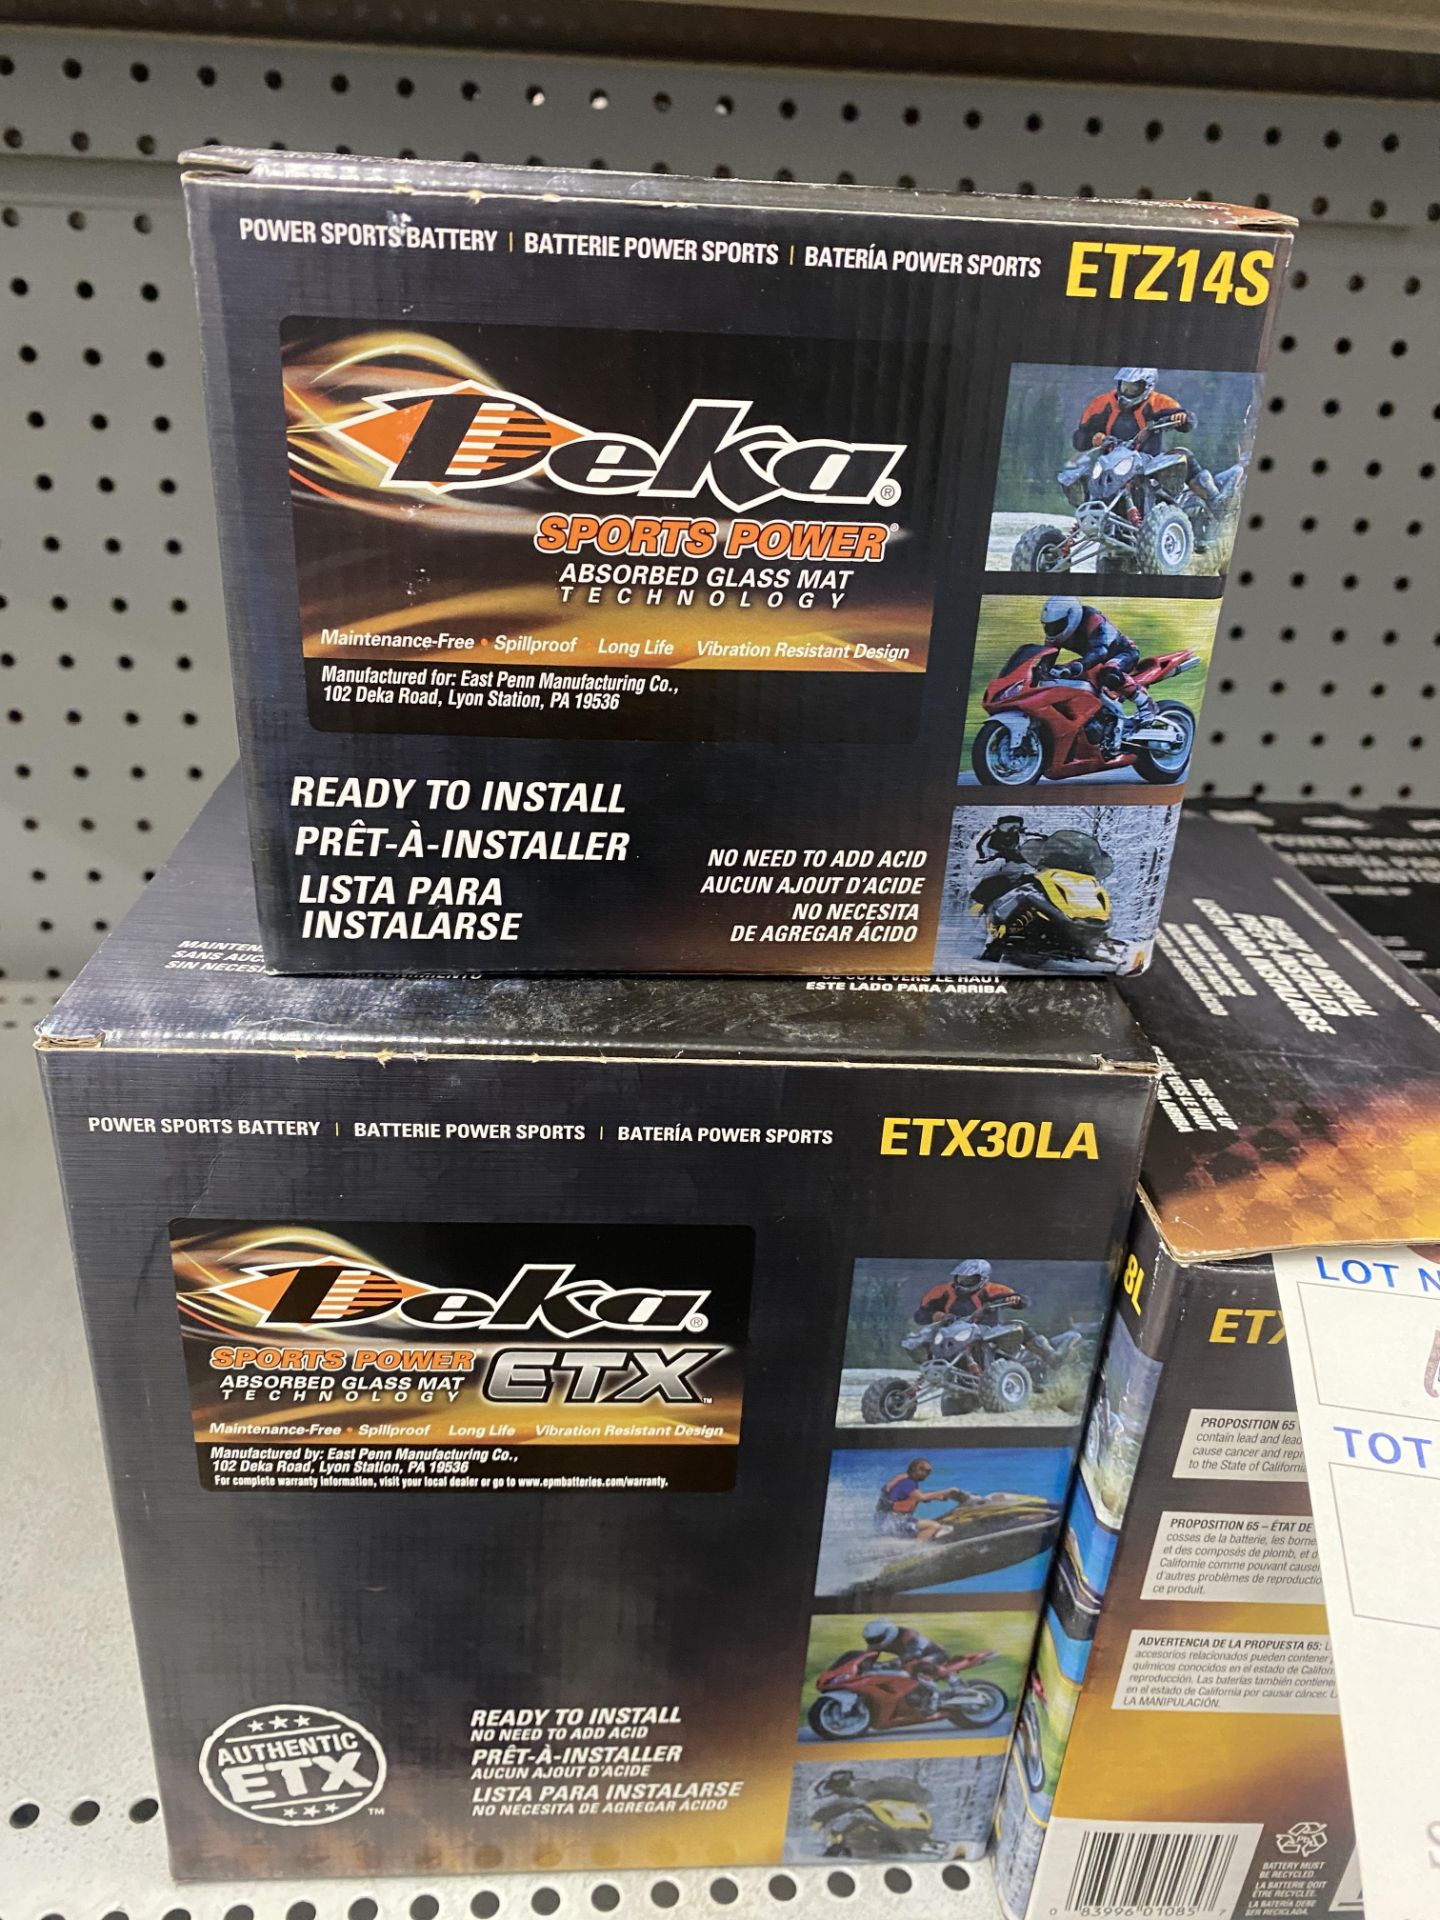 {LOT} (5) Deka Motorcycle and ATV Batteries Including Harley Battery - Image 2 of 3